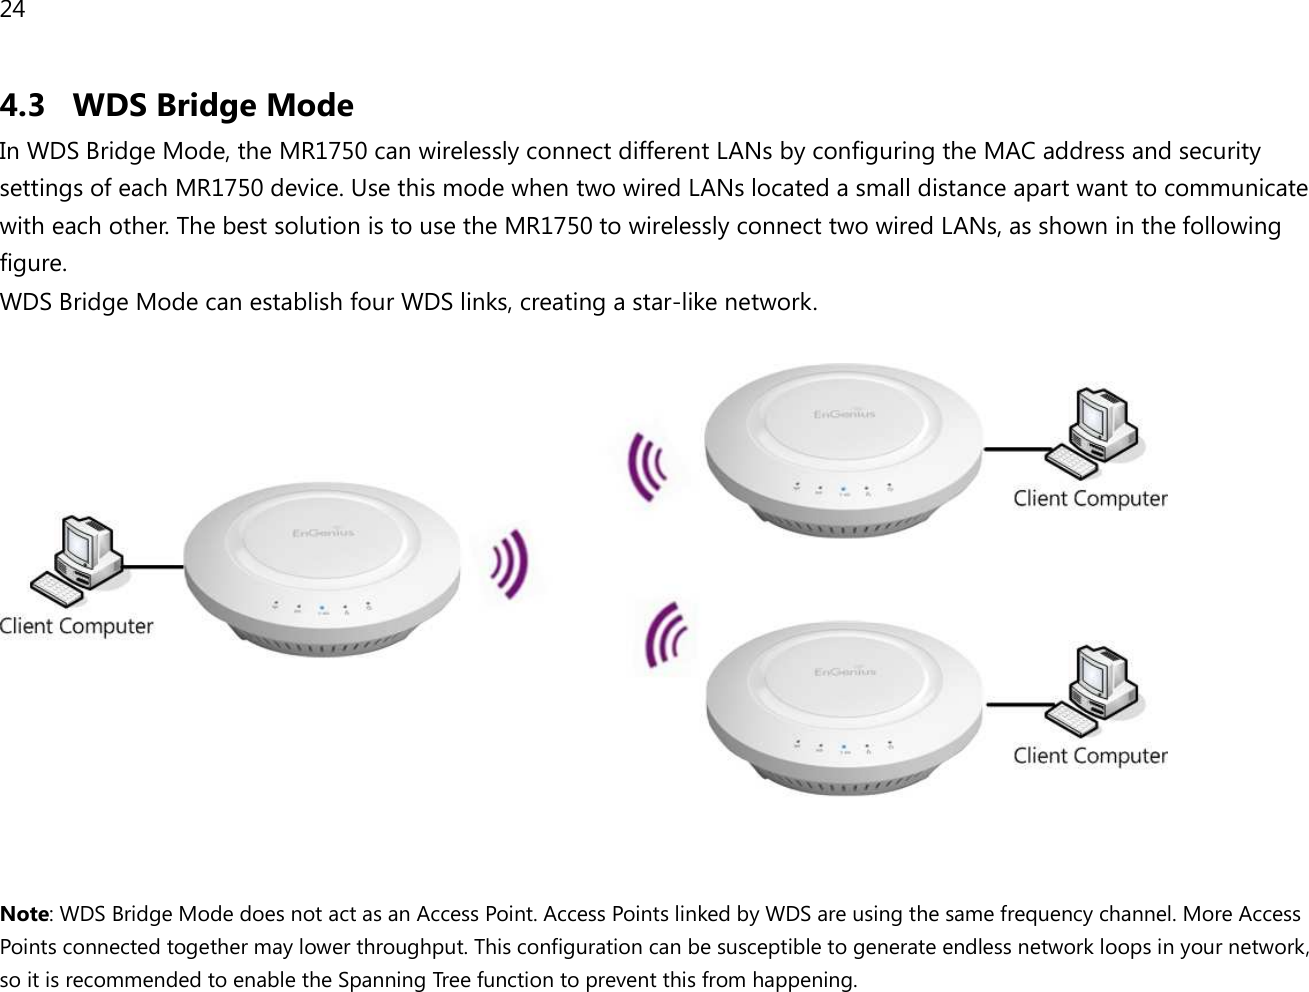 24  4.3 WDS Bridge Mode In WDS Bridge Mode, the MR1750 can wirelessly connect different LANs by configuring the MAC address and security settings of each MR1750 device. Use this mode when two wired LANs located a small distance apart want to communicate with each other. The best solution is to use the MR1750 to wirelessly connect two wired LANs, as shown in the following figure.  WDS Bridge Mode can establish four WDS links, creating a star-like network.     Note: WDS Bridge Mode does not act as an Access Point. Access Points linked by WDS are using the same frequency channel. More Access Points connected together may lower throughput. This configuration can be susceptible to generate endless network loops in your network, so it is recommended to enable the Spanning Tree function to prevent this from happening. 